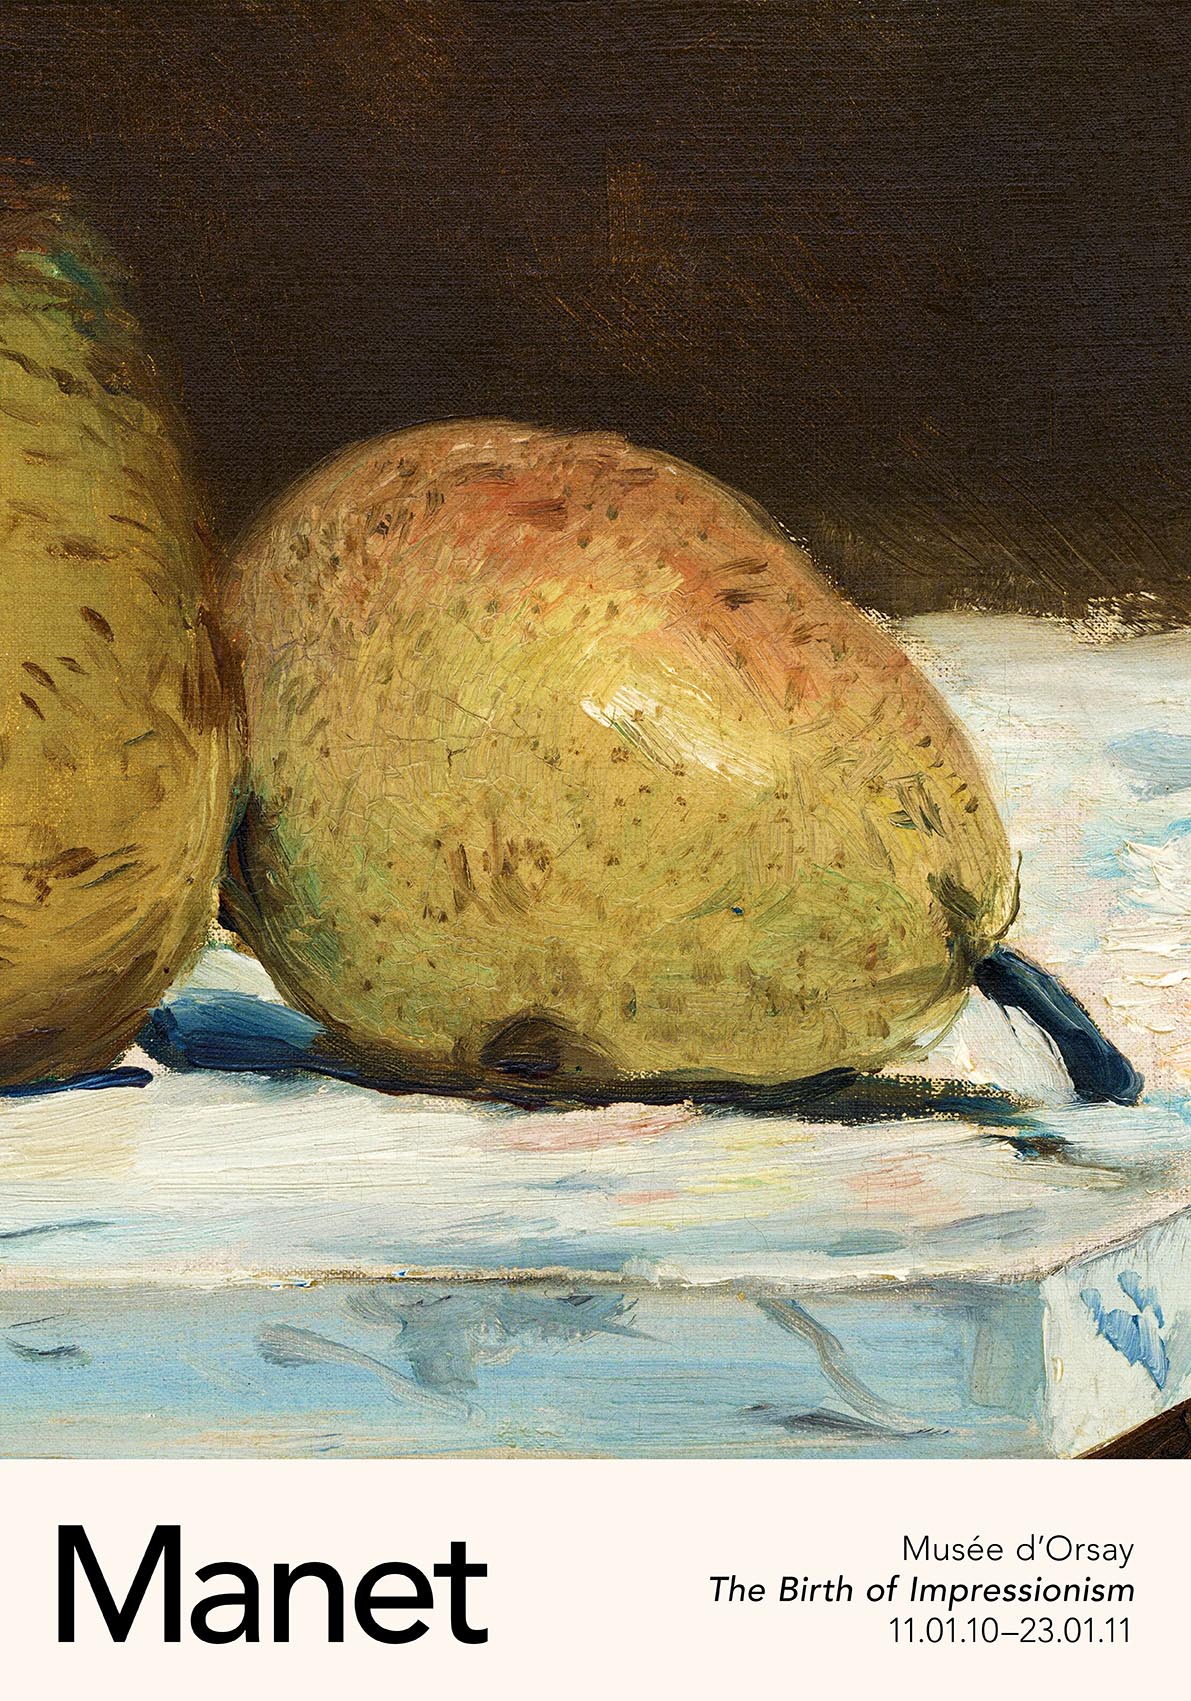 Pears by Manet Exhibition Poster